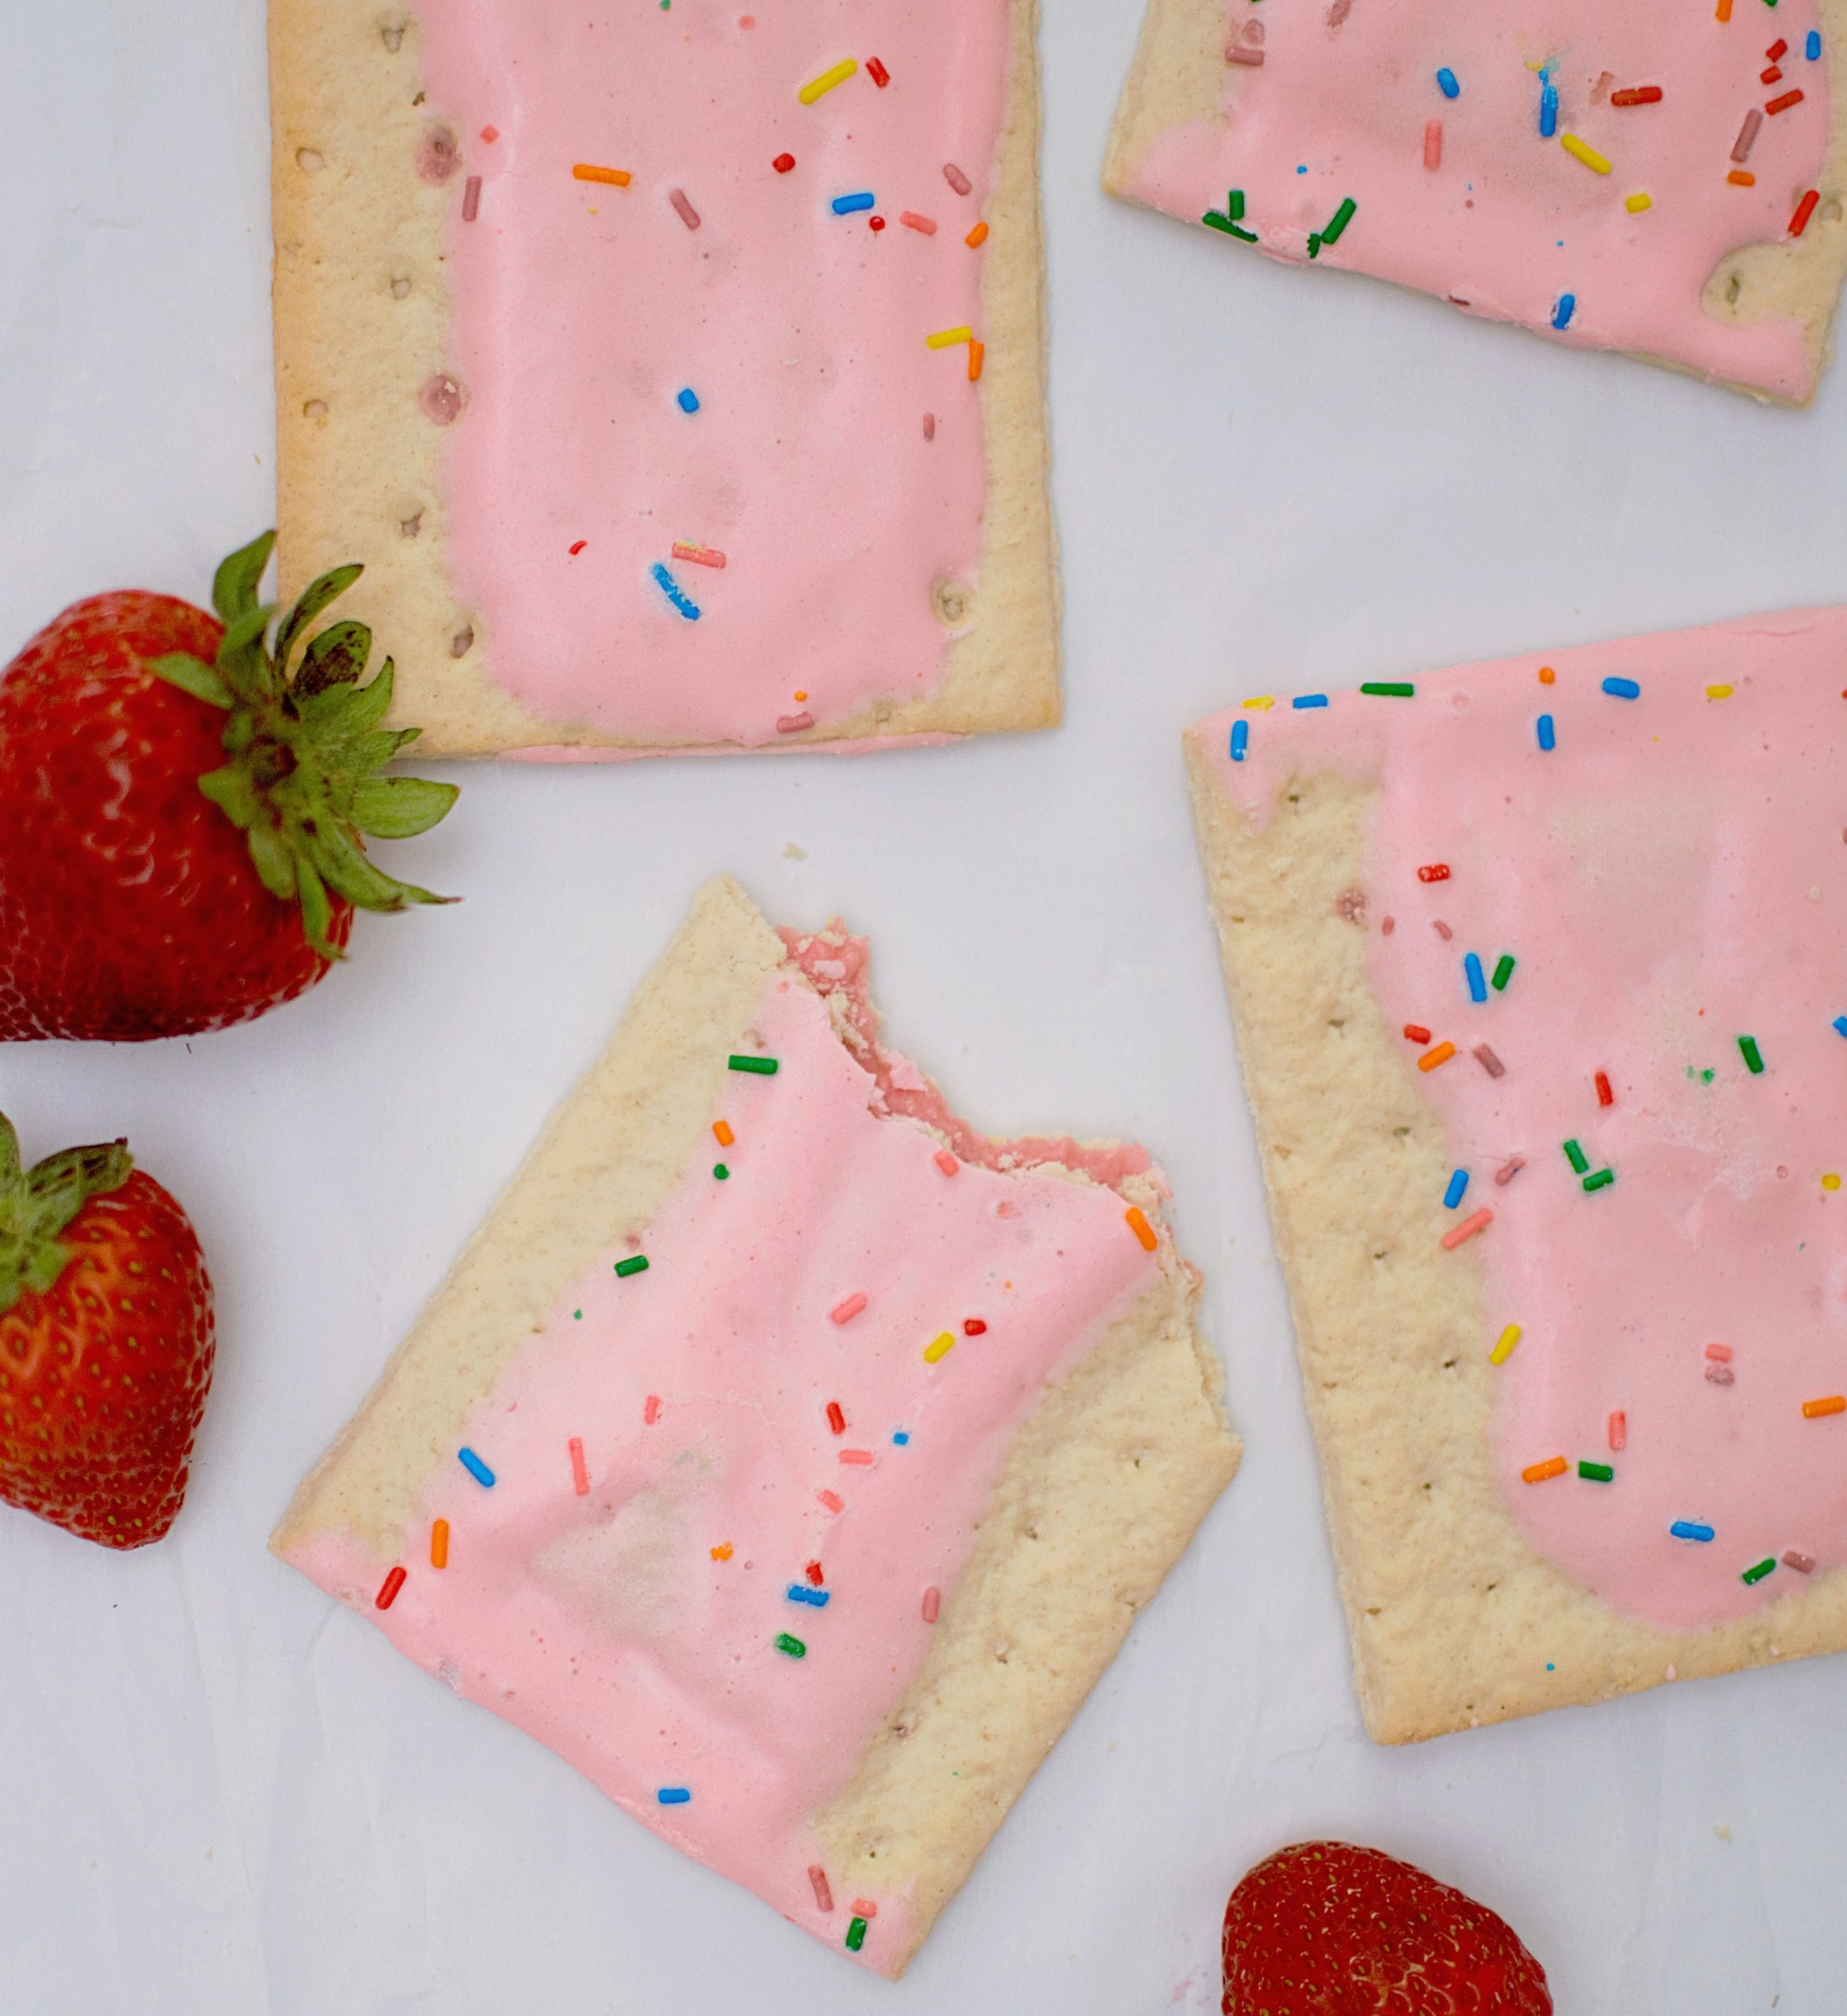 Homemade Peanut Butter and Jelly Pop Tarts